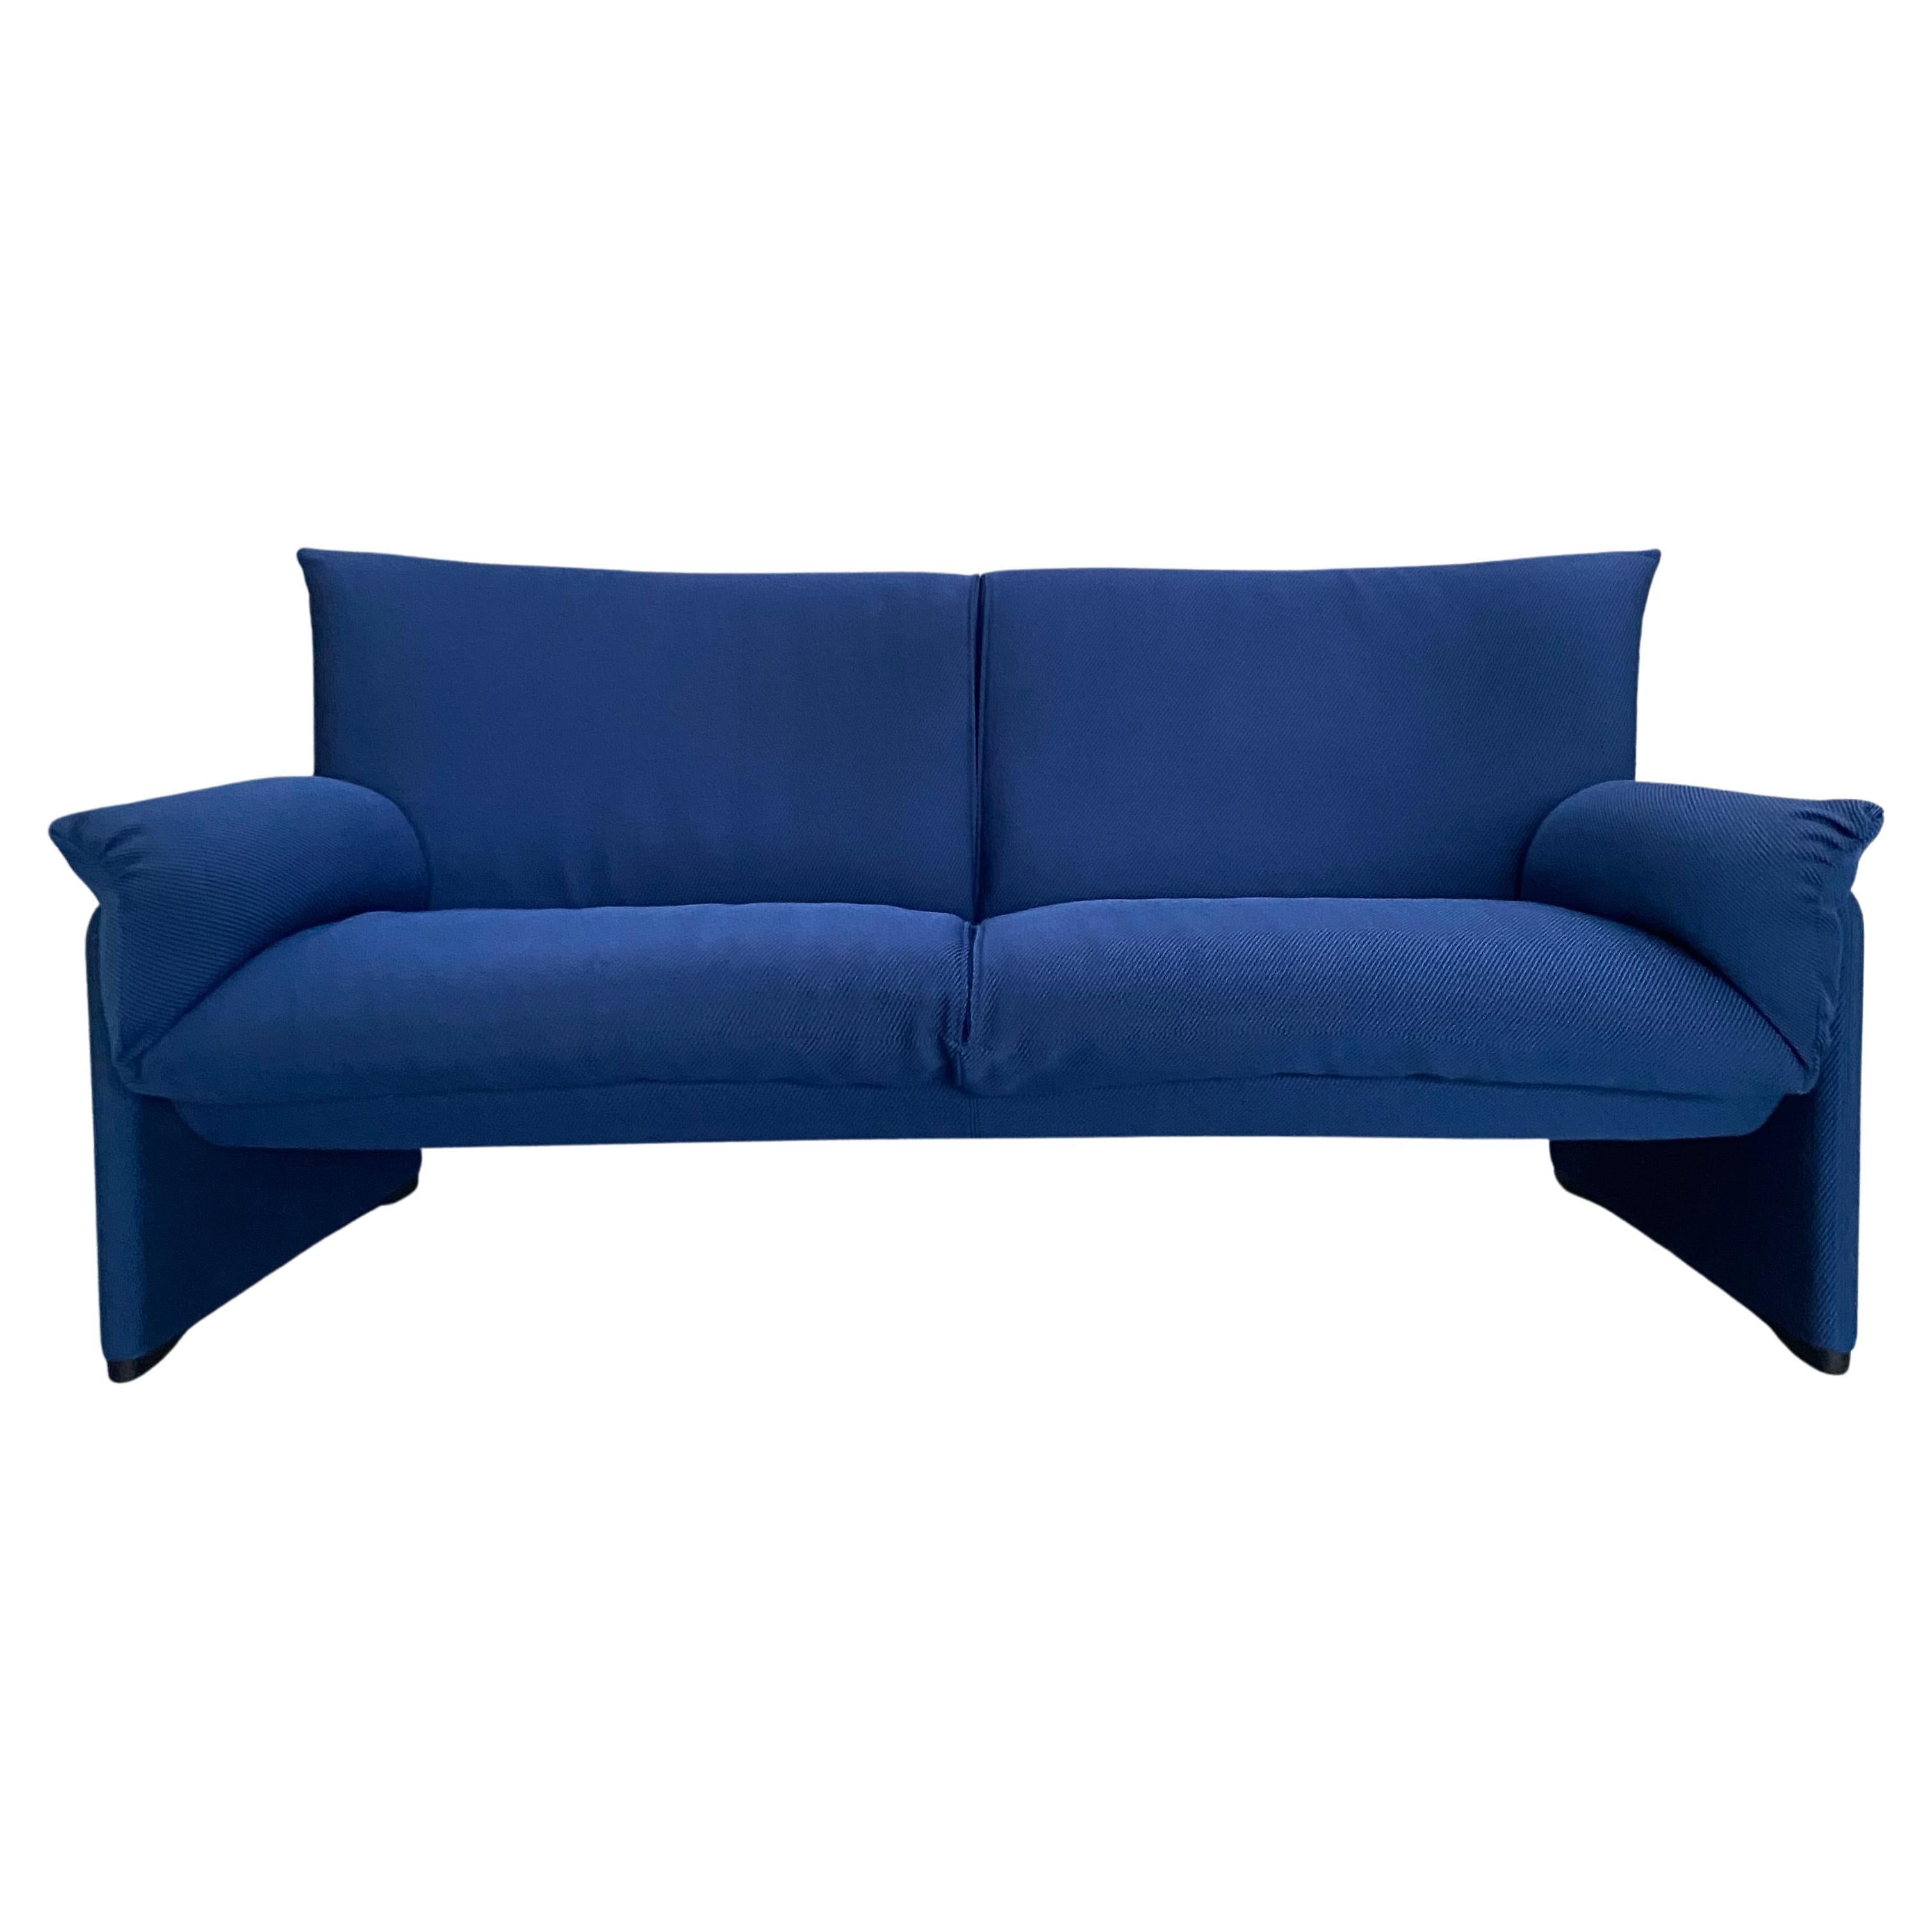 Blue "PALMARIA 709" 2-seater sofa by Vico Magistretti for Cassina, ITALY 1980 For Sale